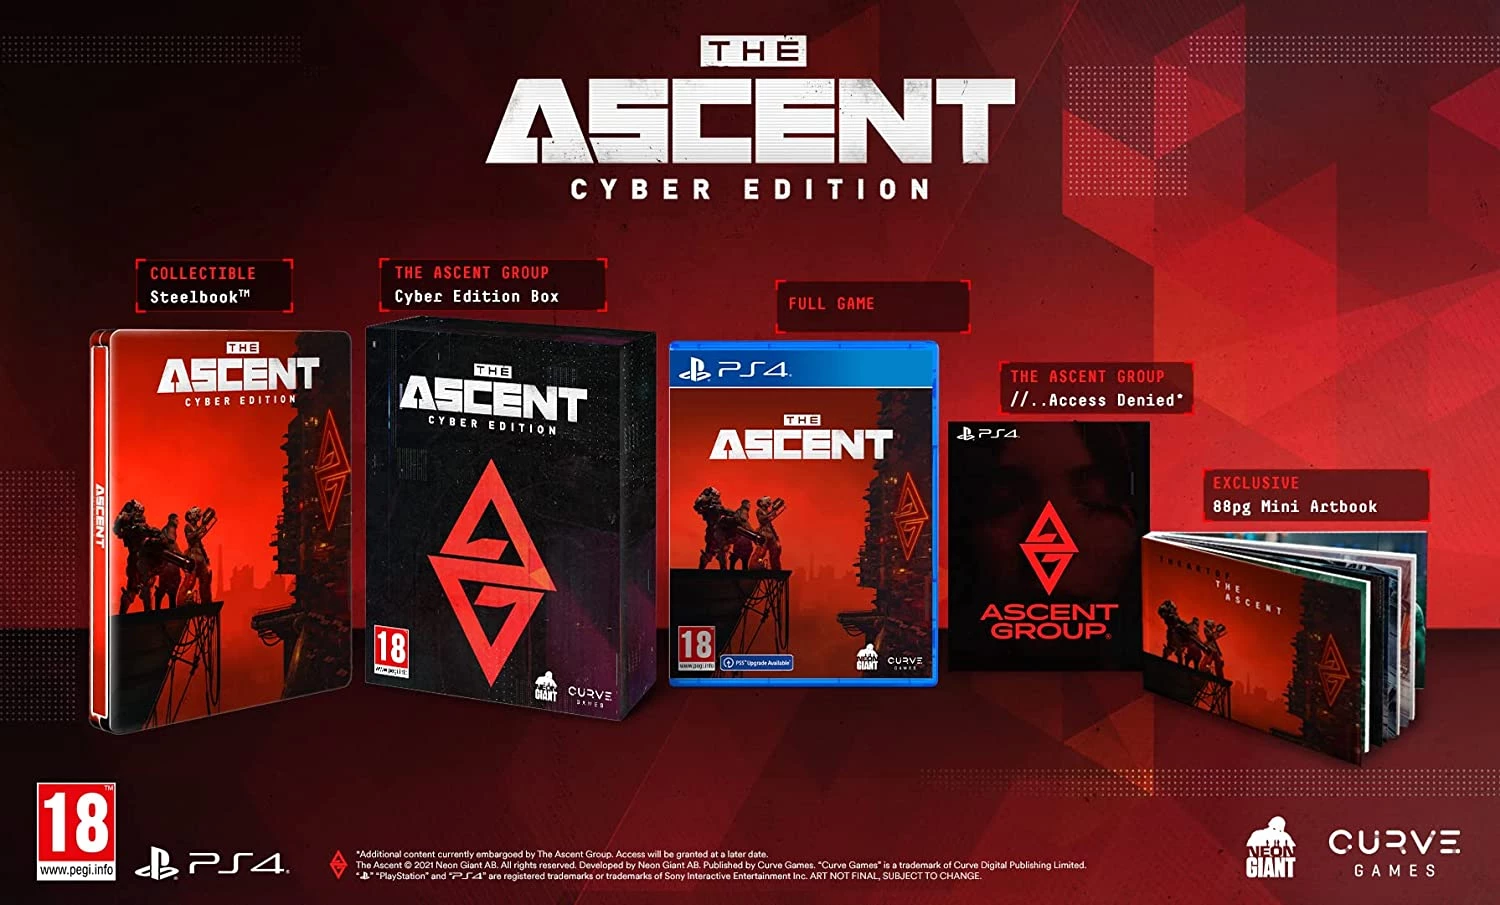 The Ascent - Cyber Edition (PS4), Curve Games